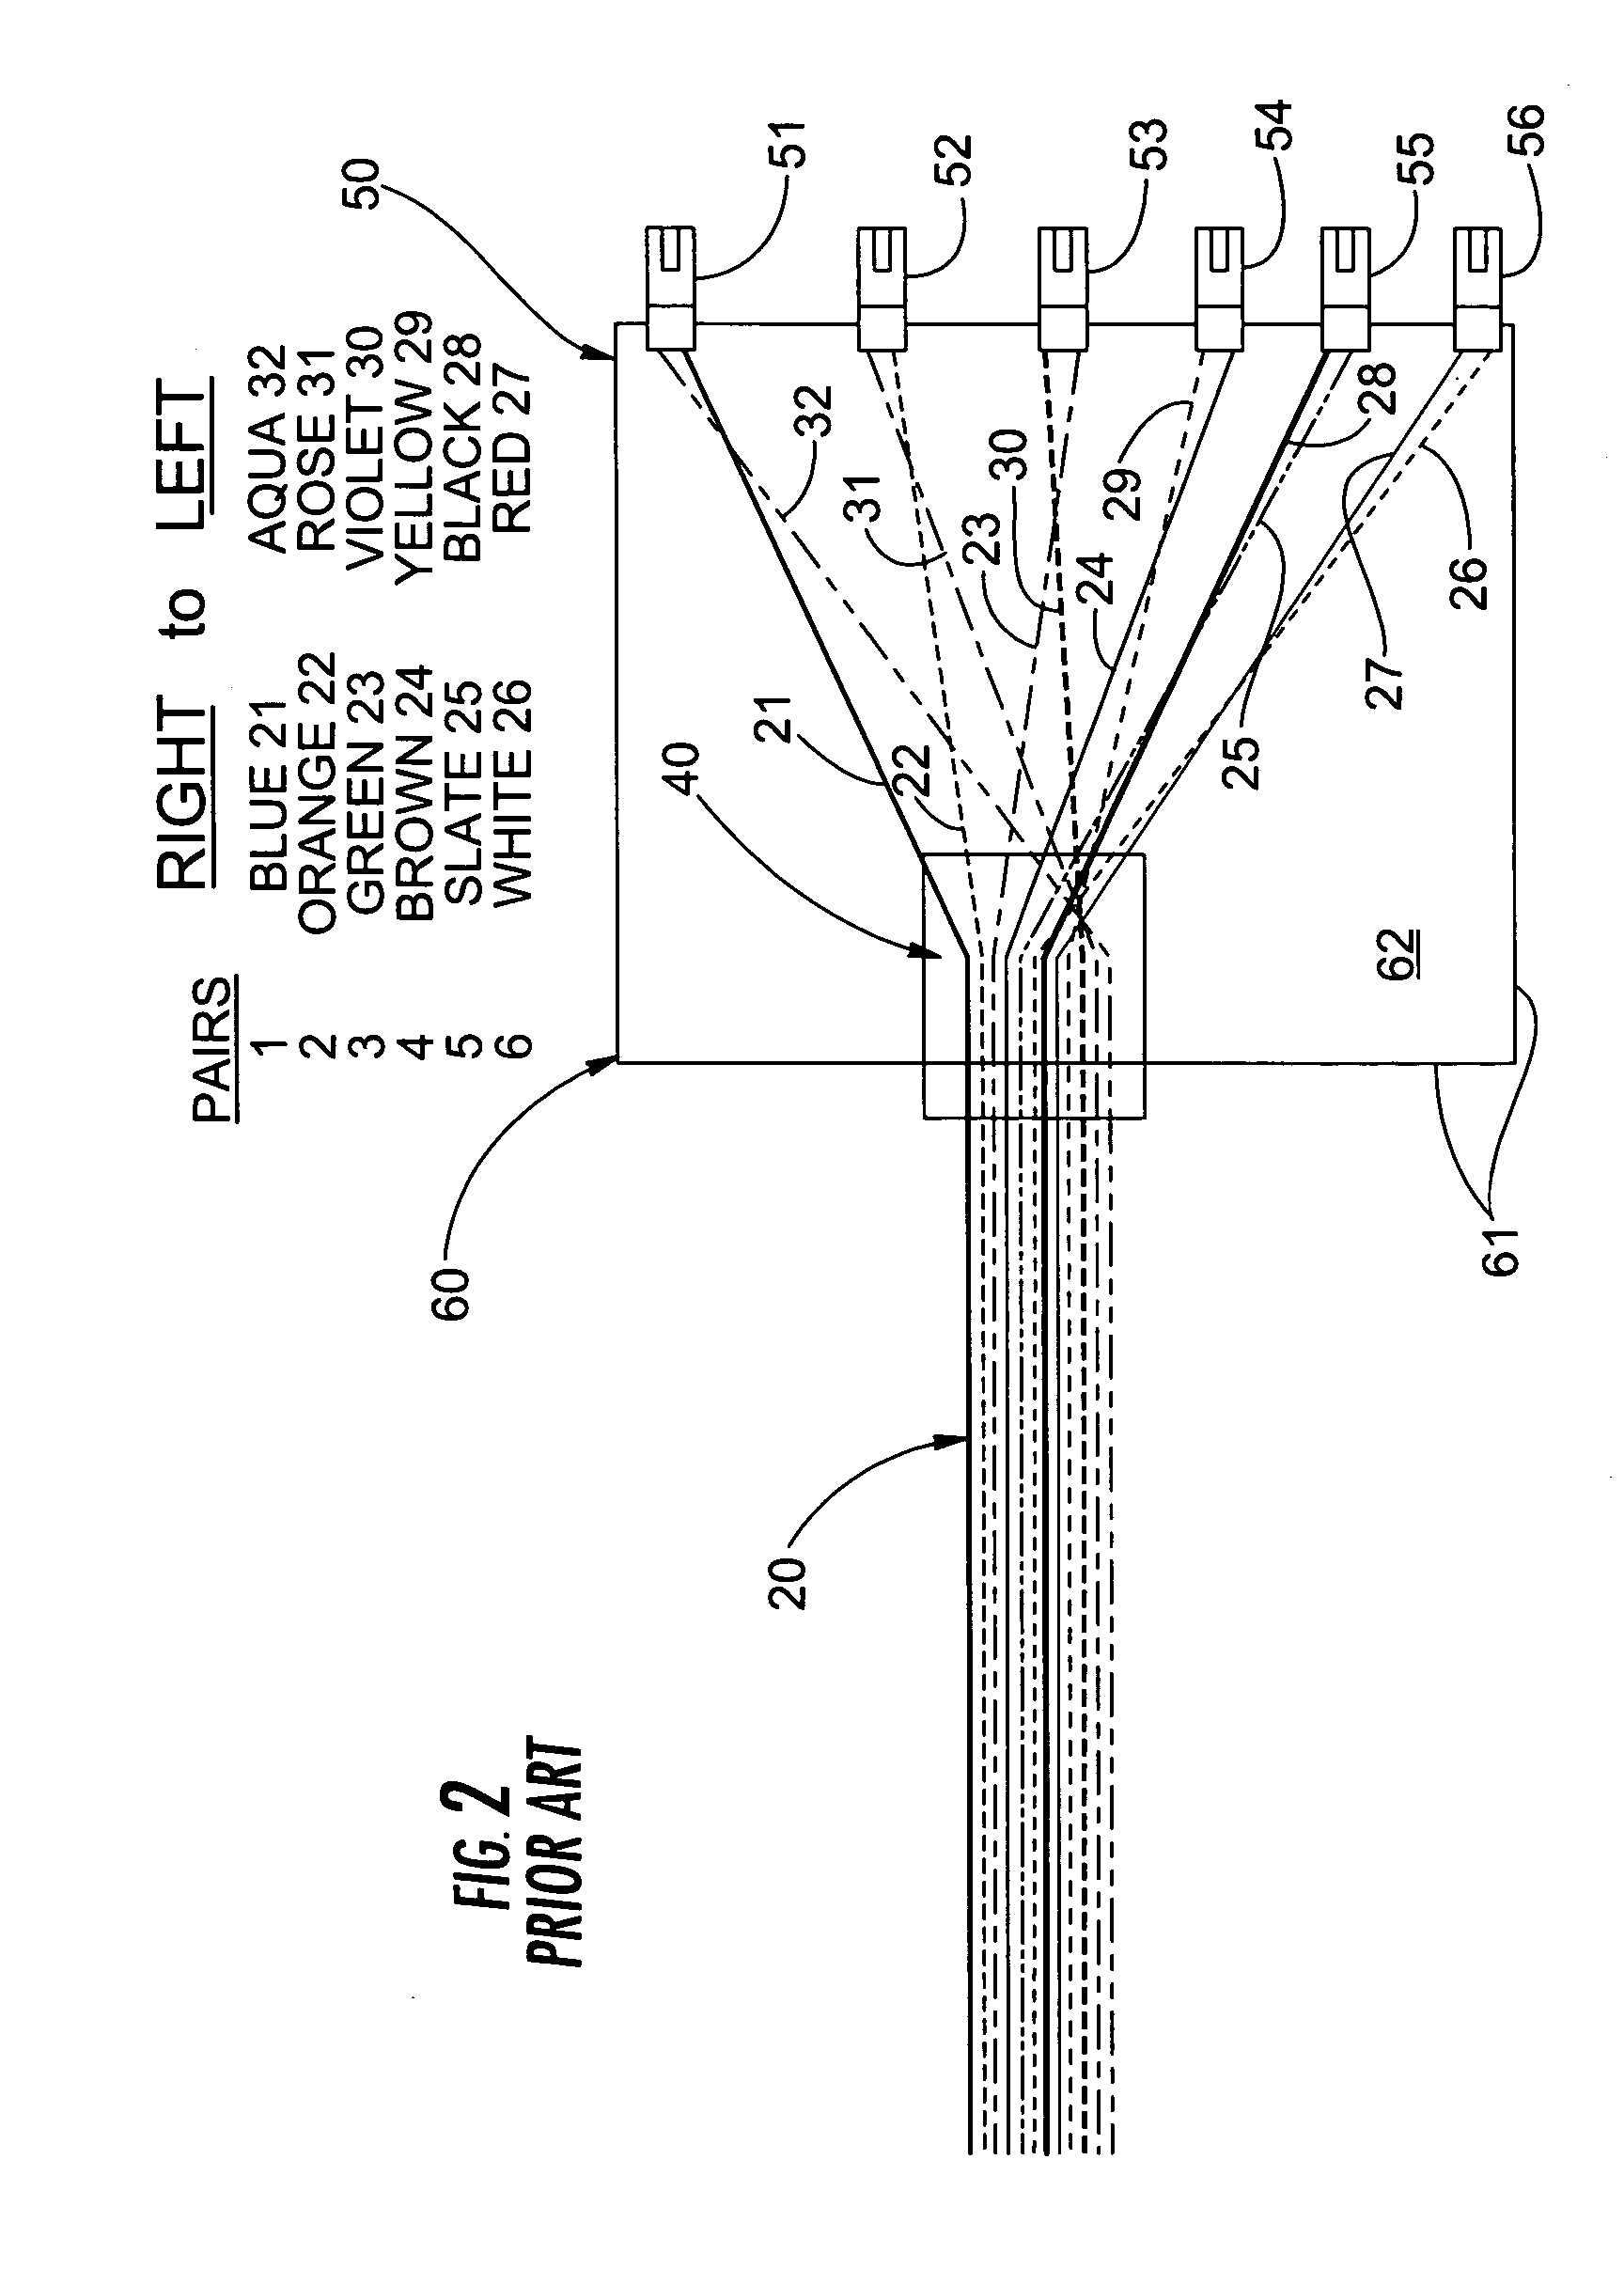 Optical polarity modules and systems